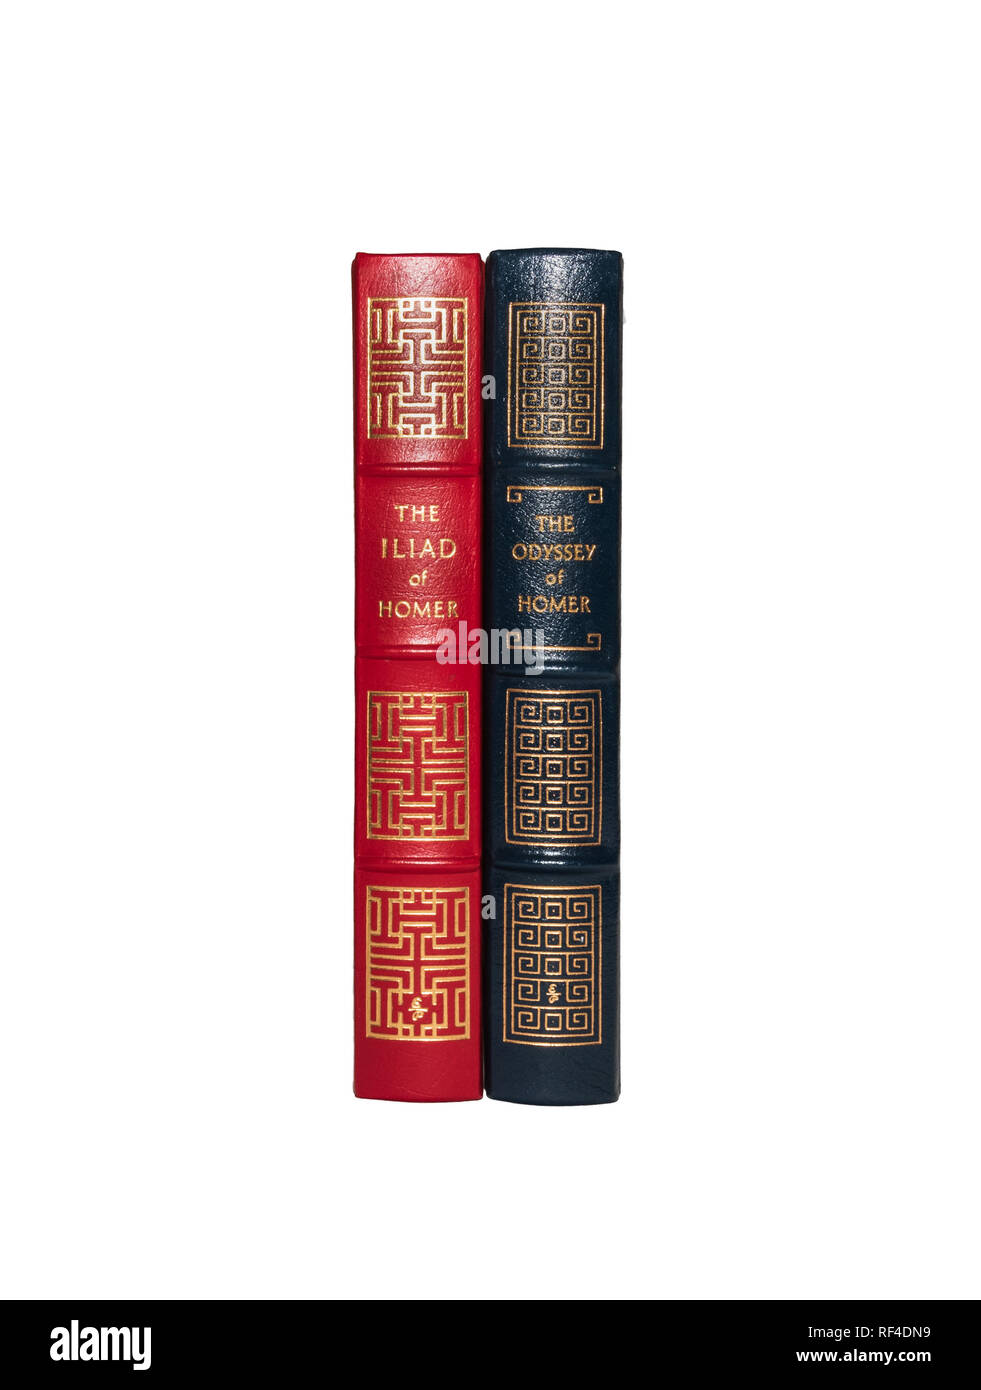 Easton Press leather-bound editions of The Iliad and The Odyssey, by Homer, isolated on pure white background. Stock Photo